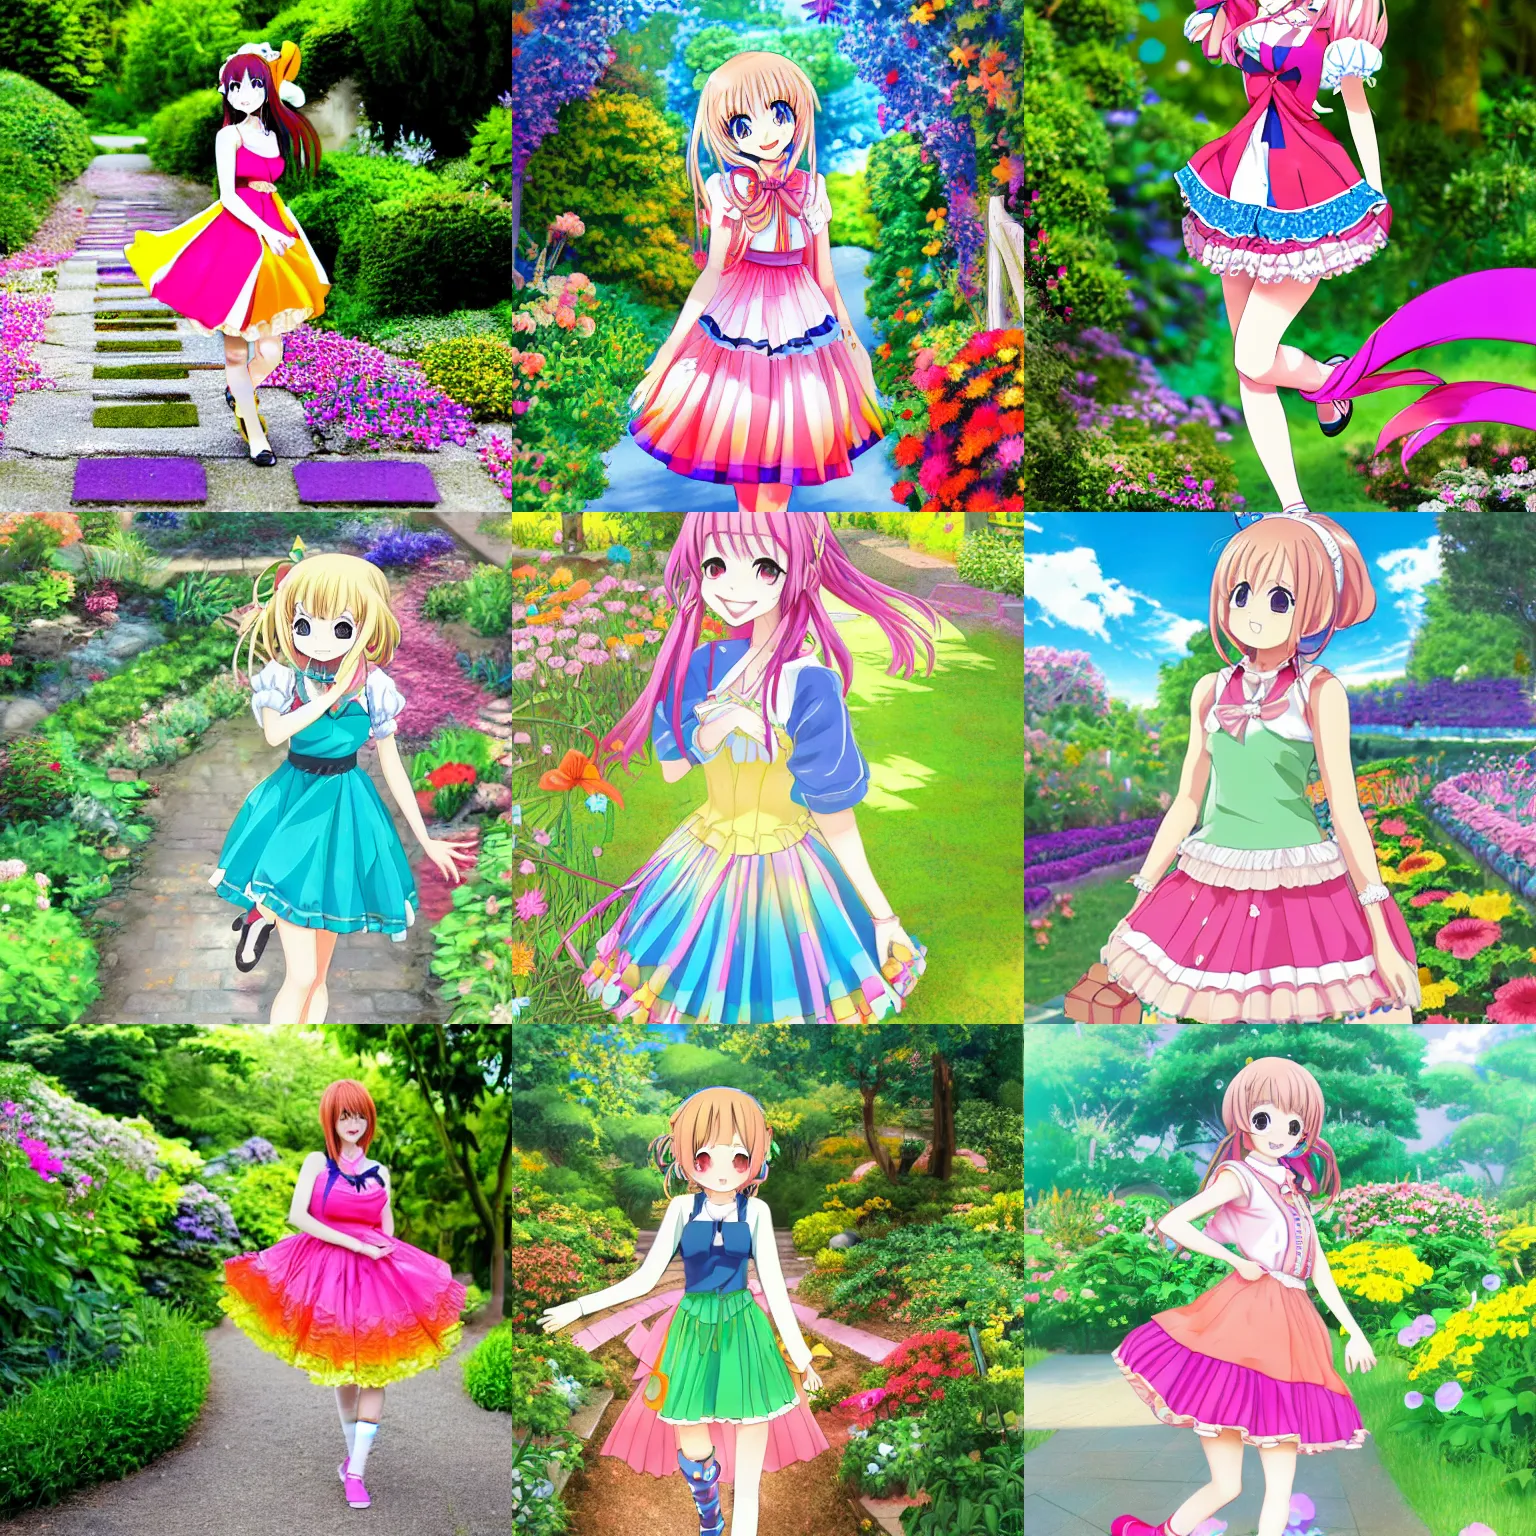 Prompt: a very cute art of a smiling anime girl idol wearing a colorful dress, walking at the garden, detailed